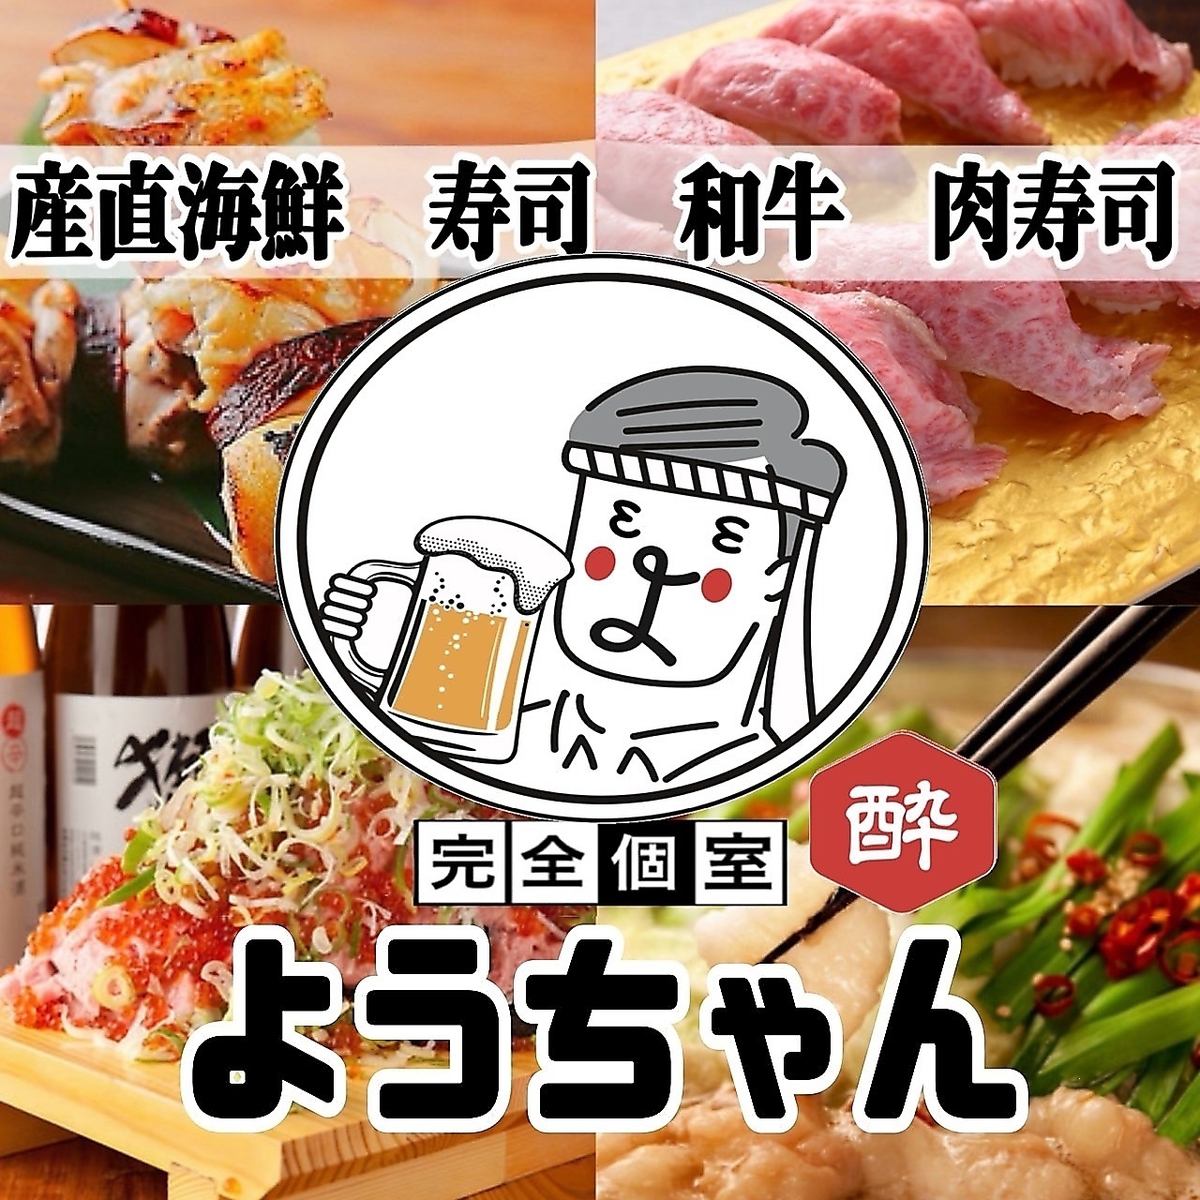 ★1 minute walk from Omiya station Authentic cuisine available in all-you-can-eat and drink plan♪ 3 hours 2480 yen~